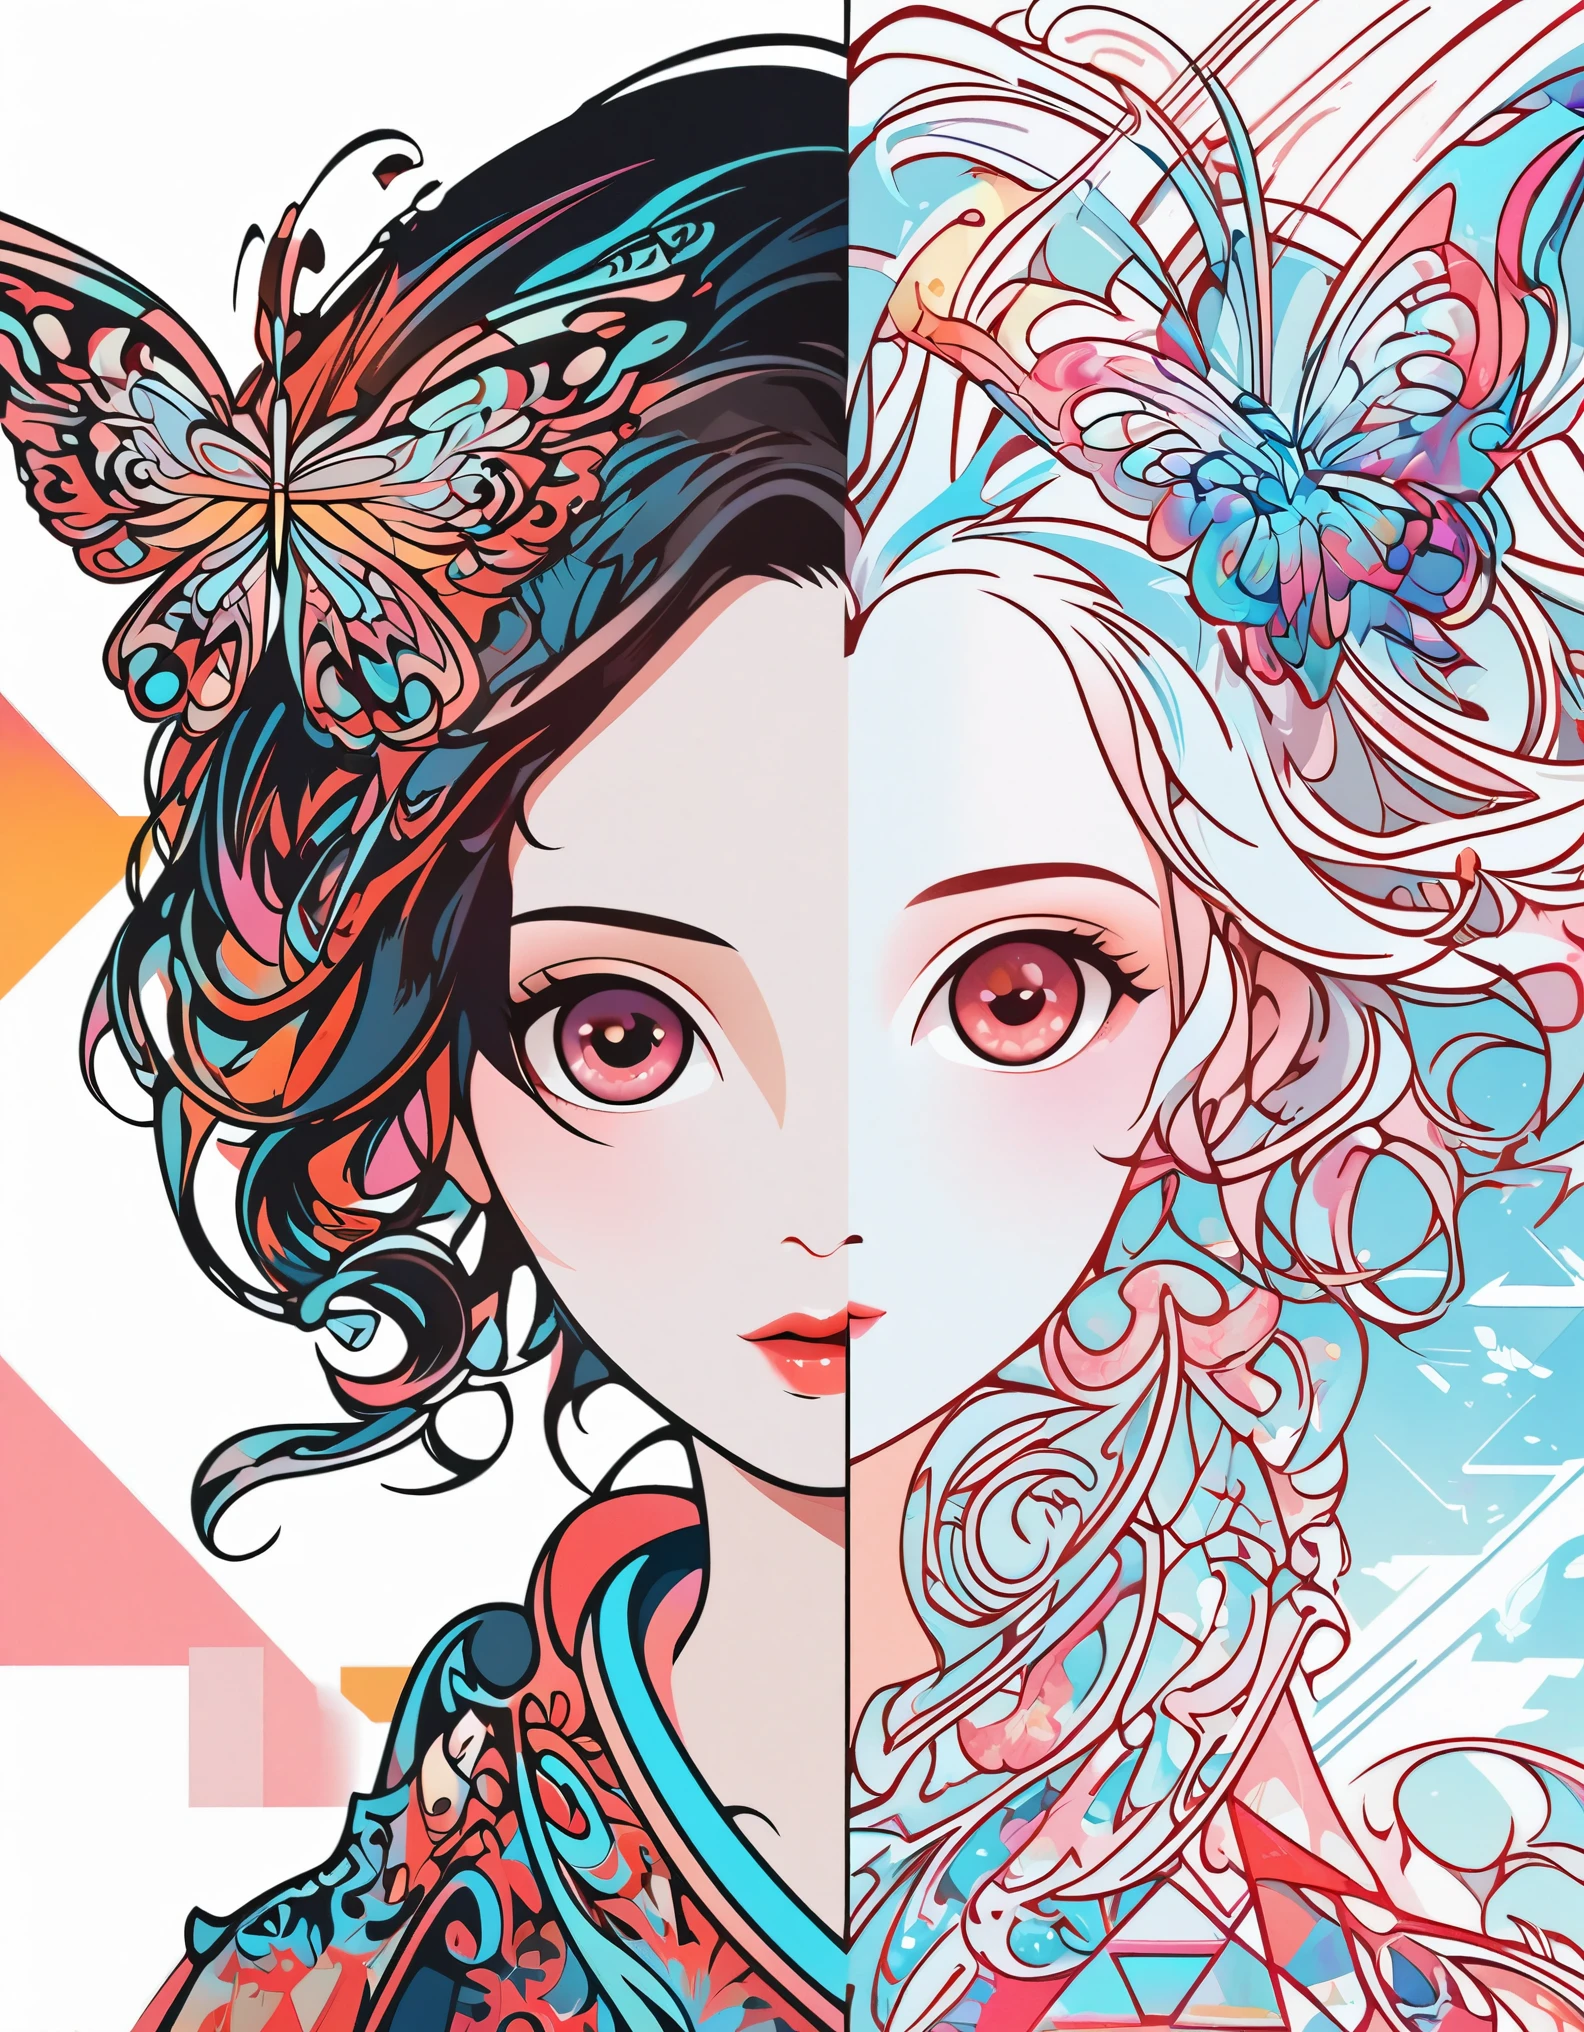 girl，portrait，vector art，vector art：1.2，floral pattern：1.1，geometric elements，sharp lines，X-ray，neon color，beautiful eyes，color palette，line art，Hair and butterfly transformation，Symmetrical balance，Fantasy elements，dreamy atmosphere，Geometric symmetry，soft light，ethereal，White background，Moderate：digital illustration。